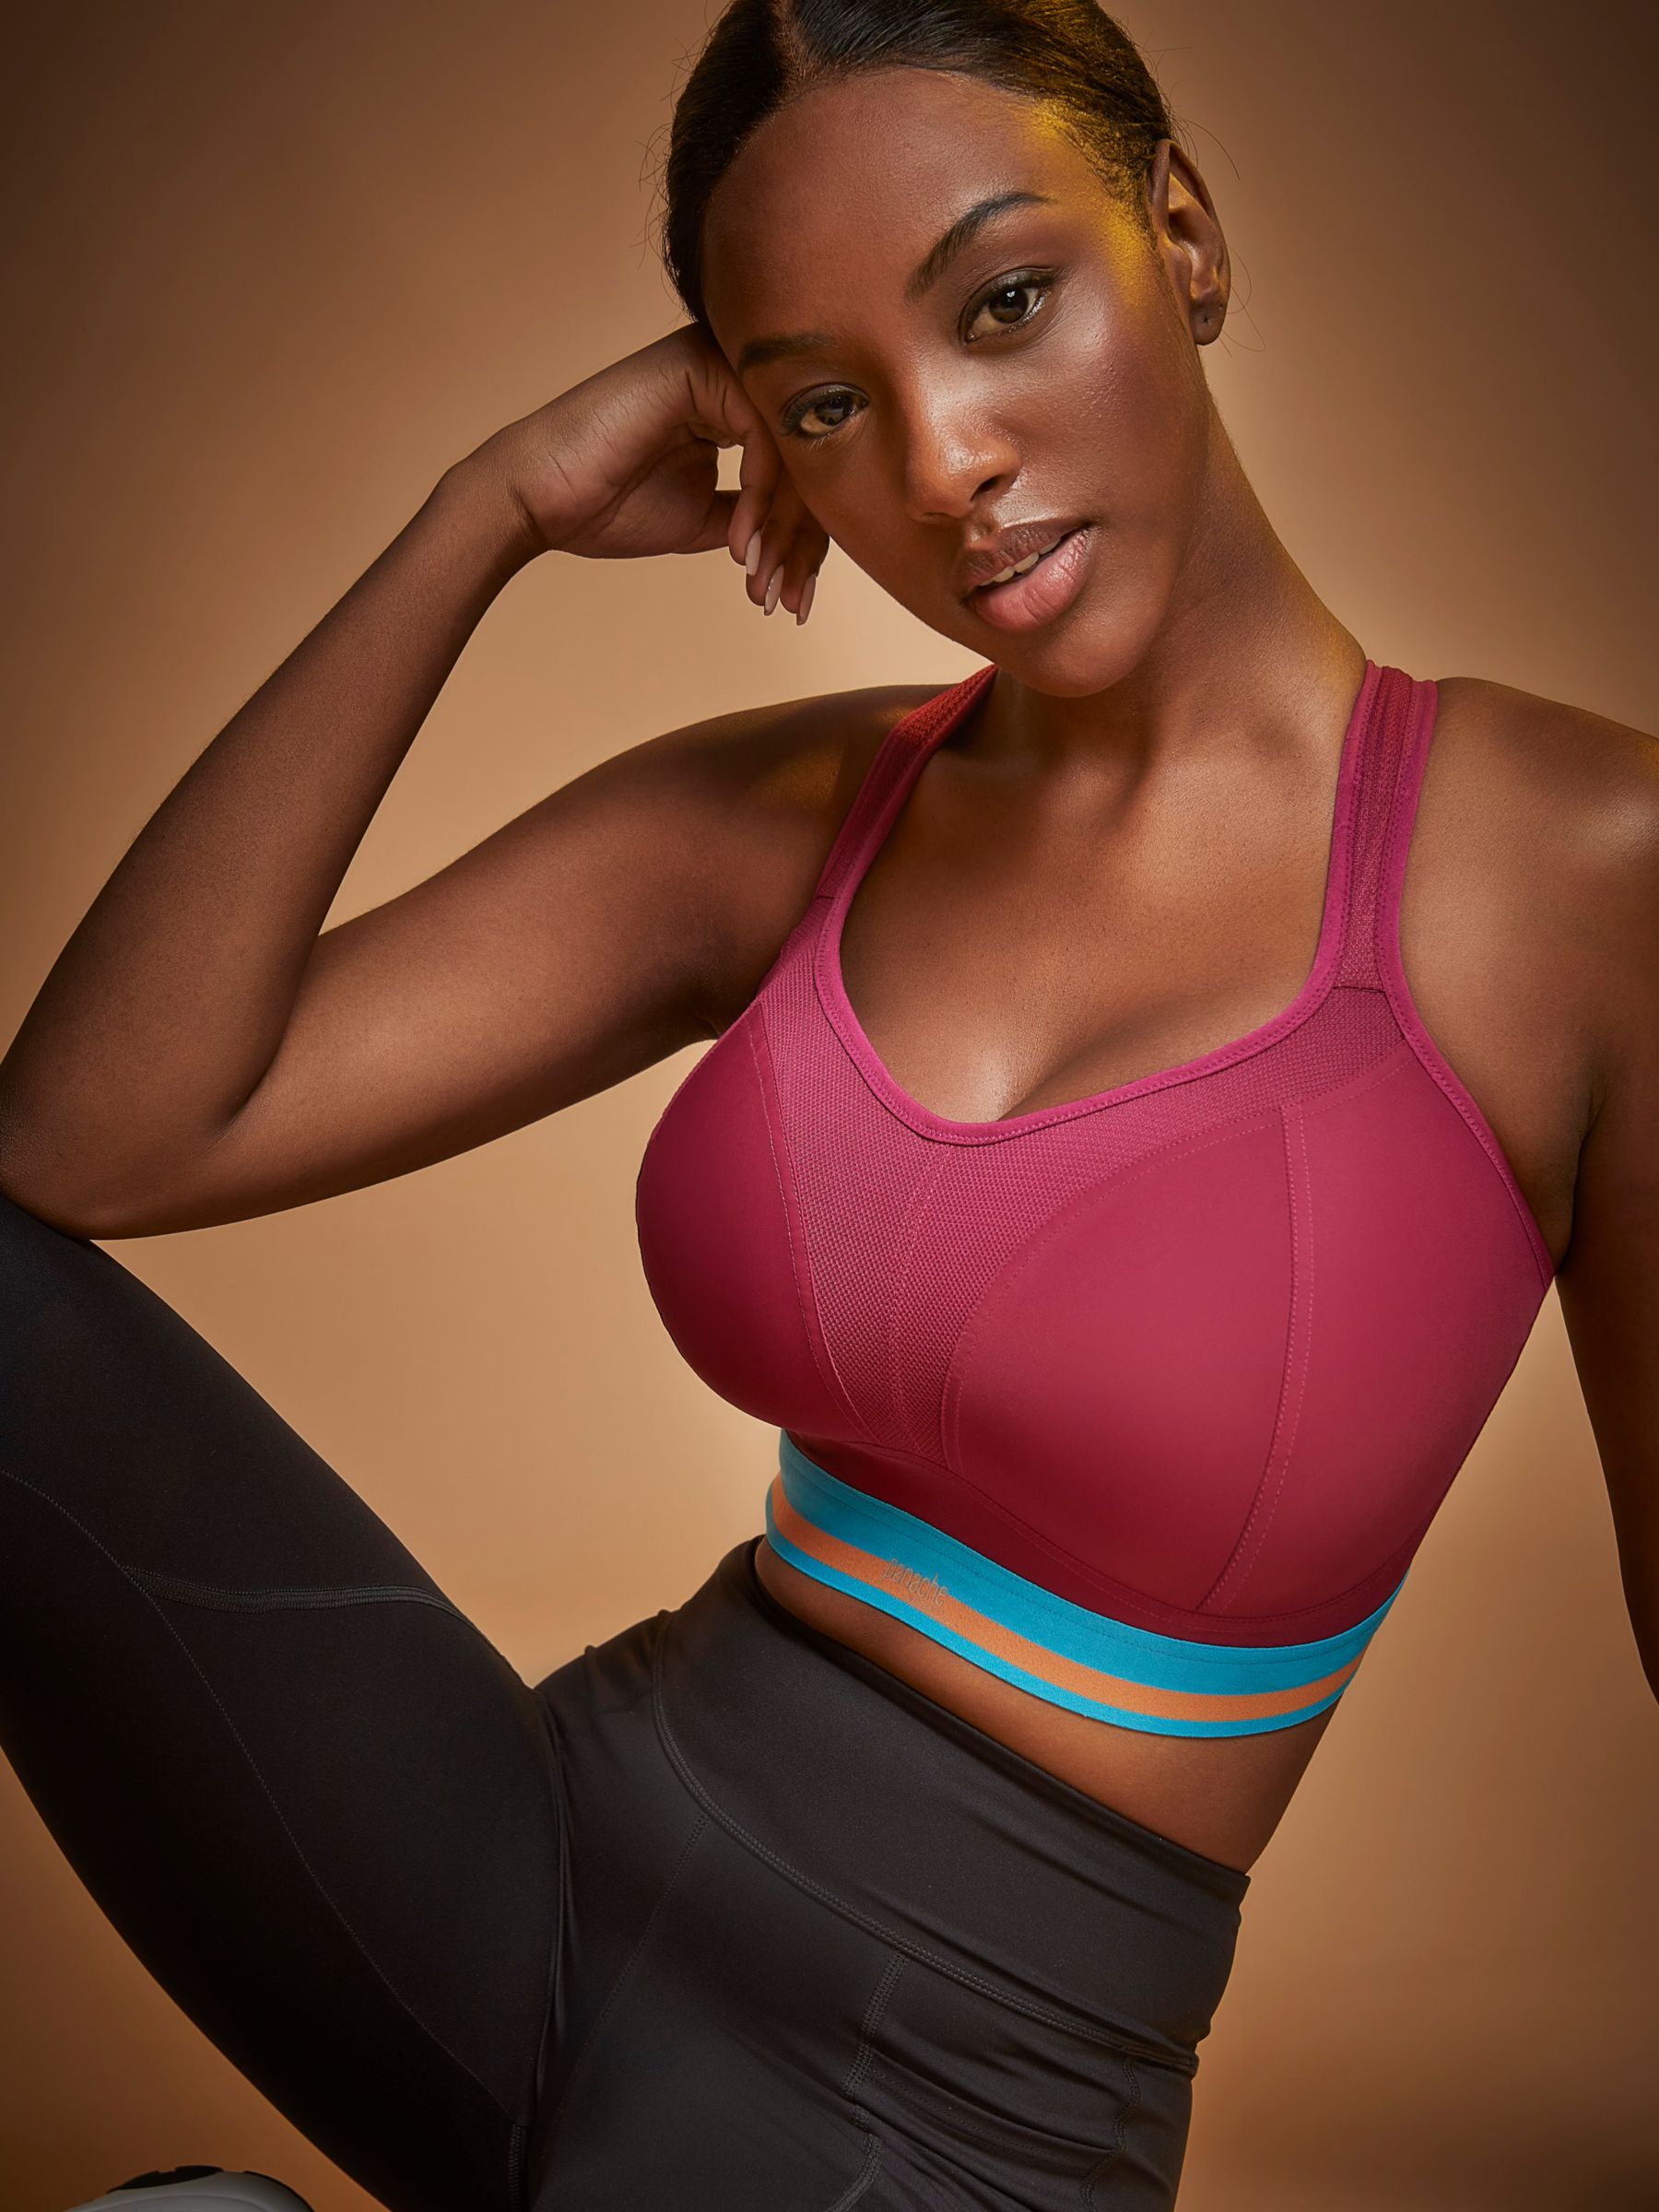 Buy Adidas Black Non Wired Padded Sports Bra for Women Online